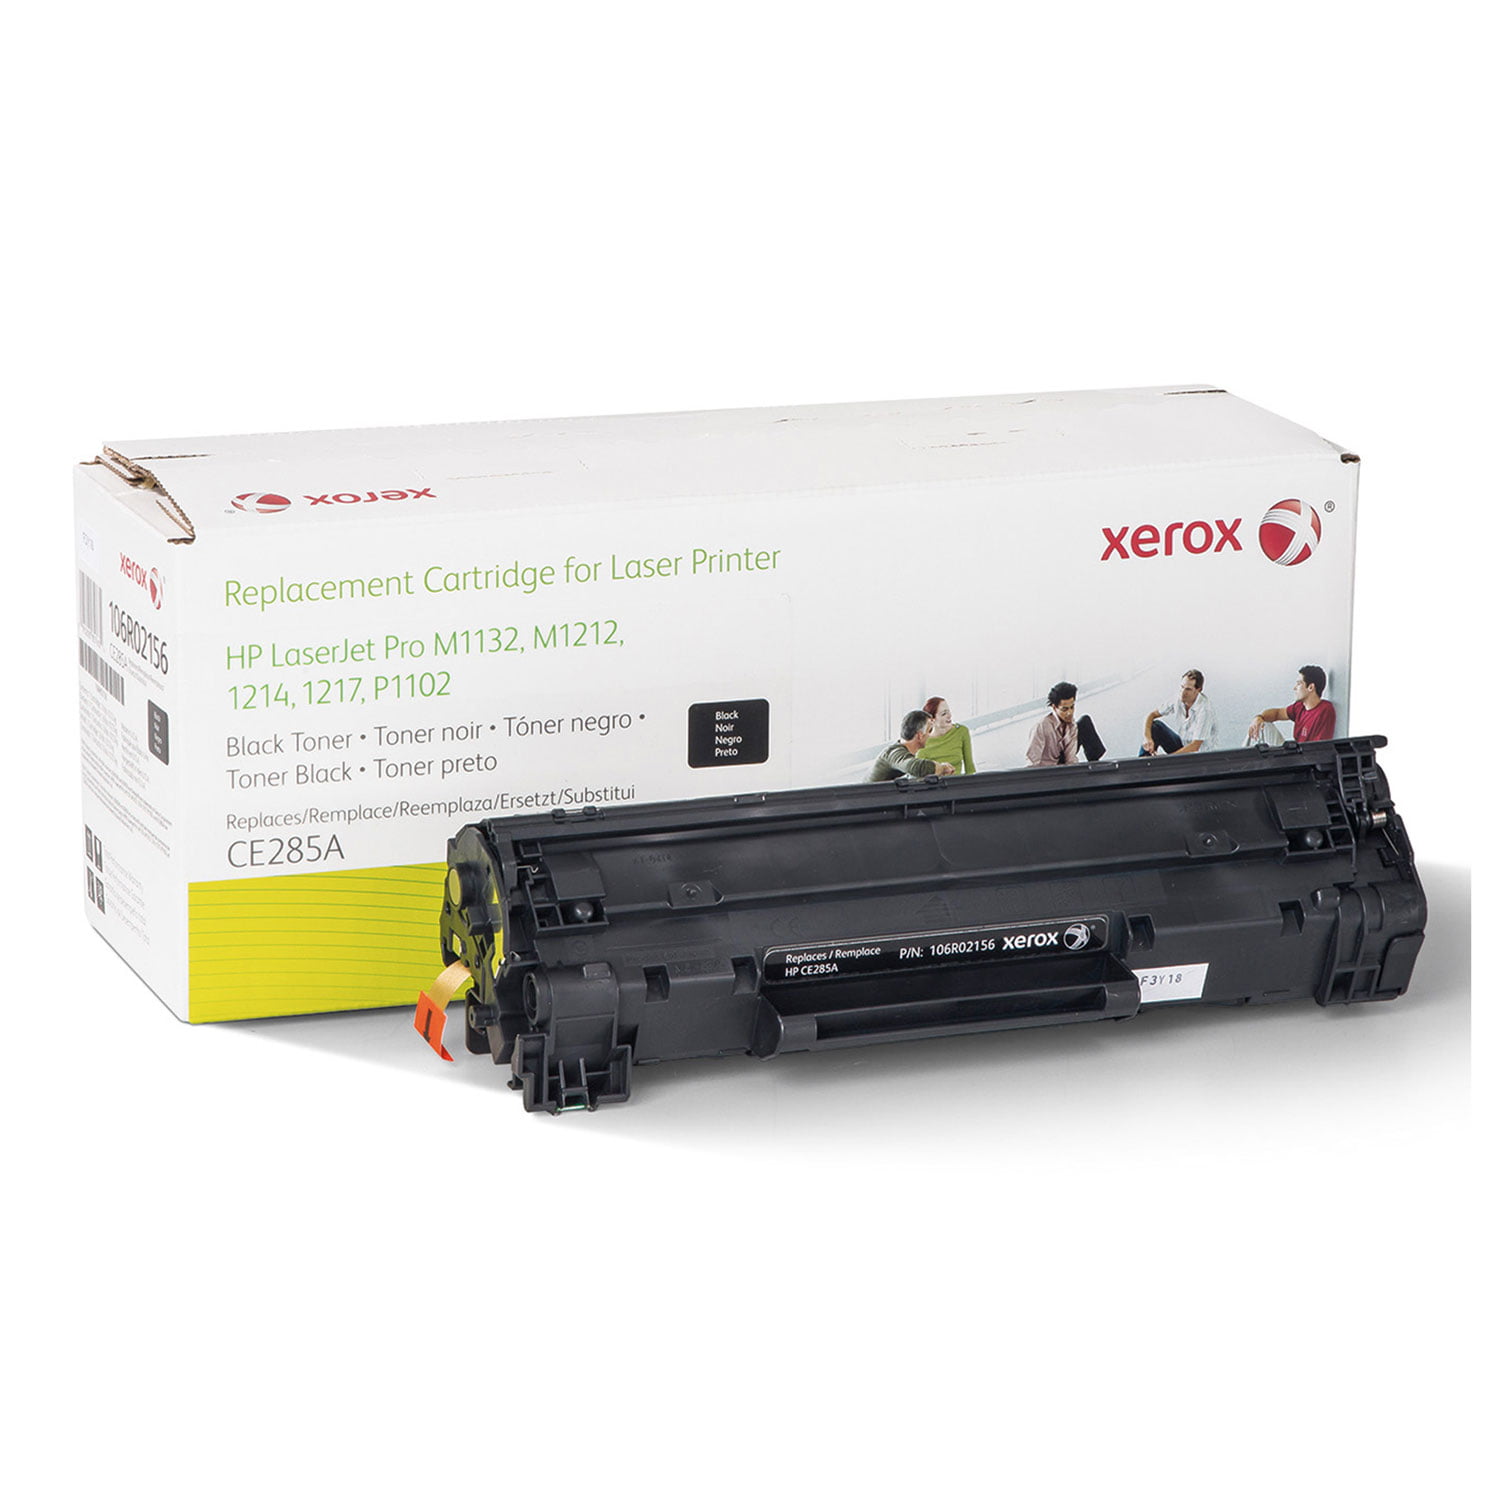 Details about   NEW XEROX WASTE TONER CONTAINER BOTTLE 008R90352 PACK OF 4 CONTAINERS 